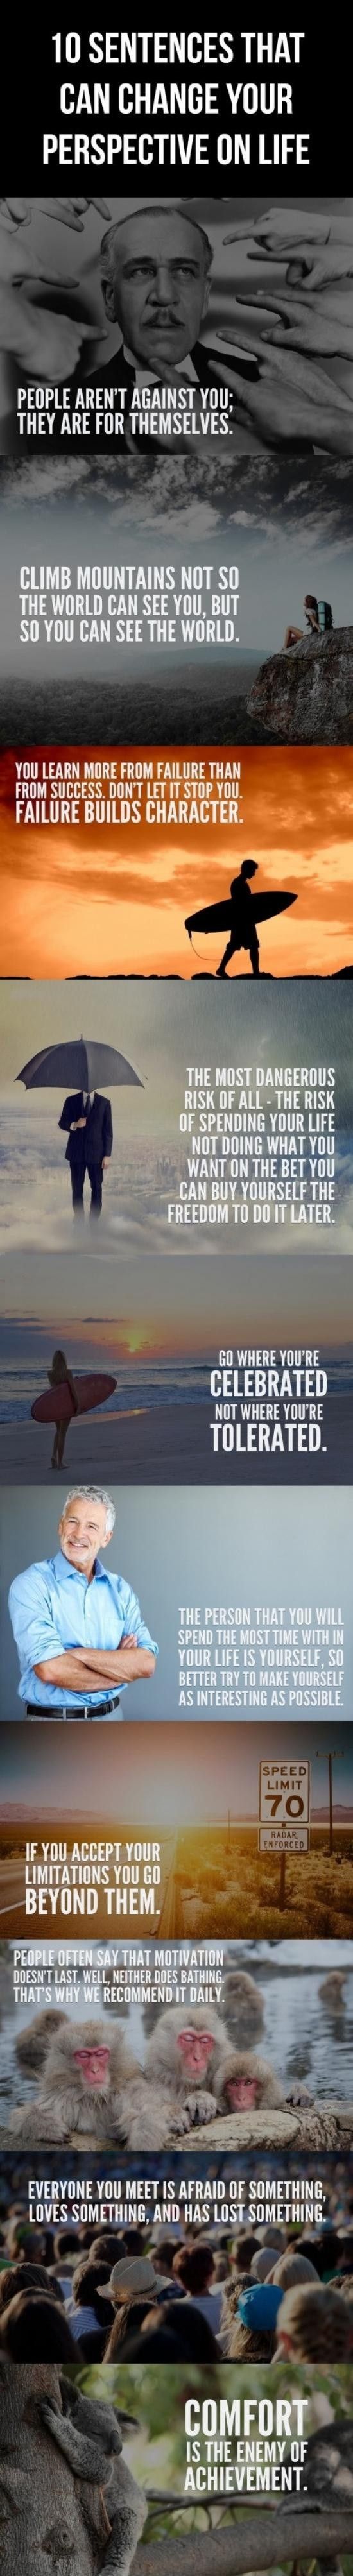 10 Sentences That Can Change Your Perspective On Life